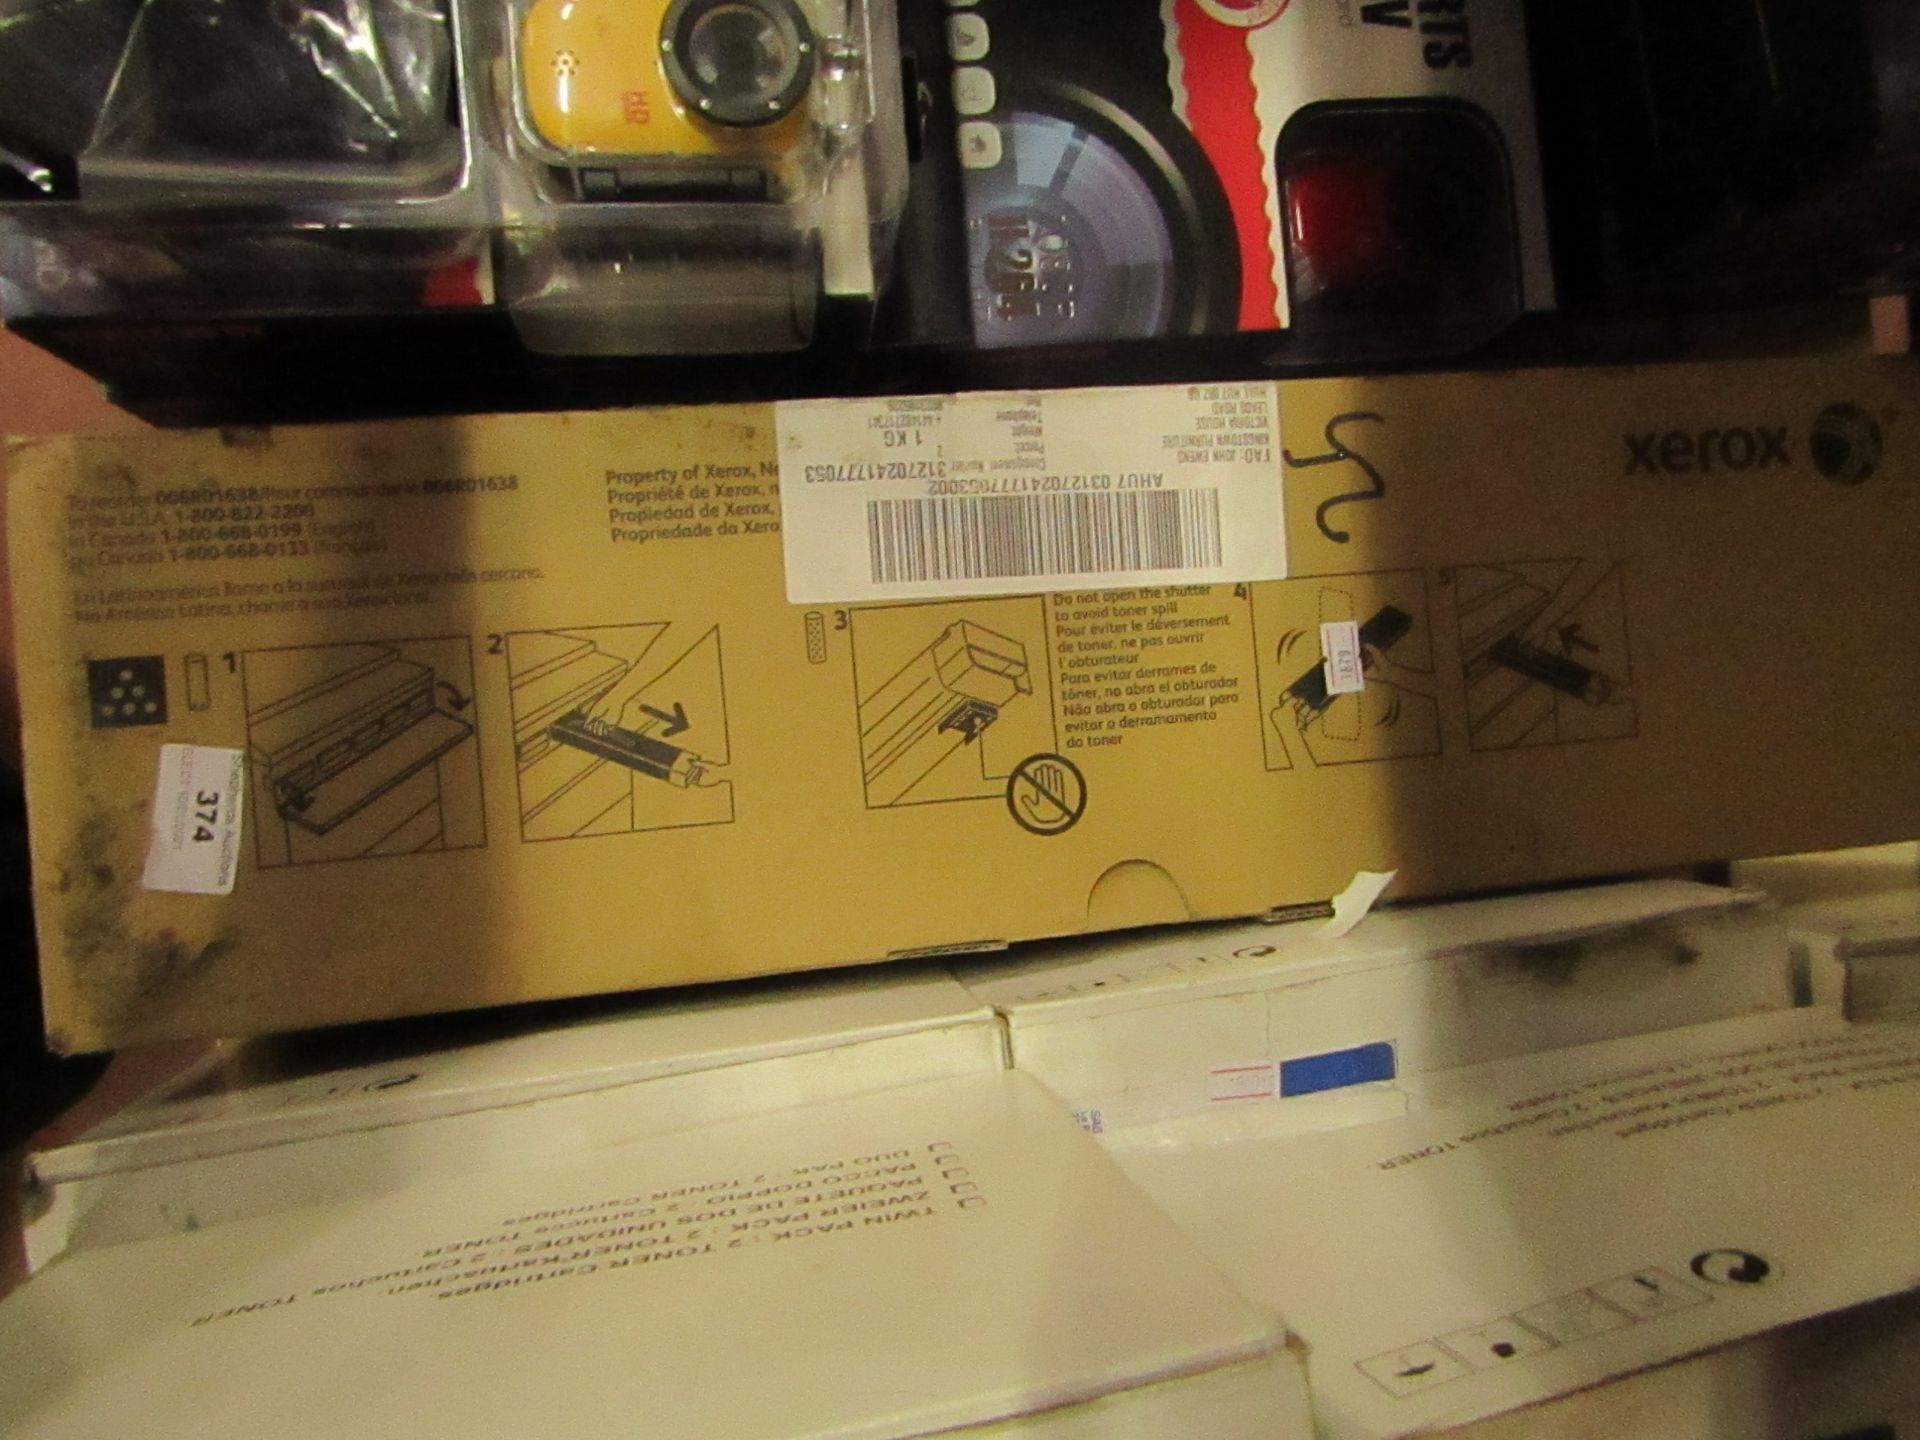 Xerox printer toner, unchecked and boxed.